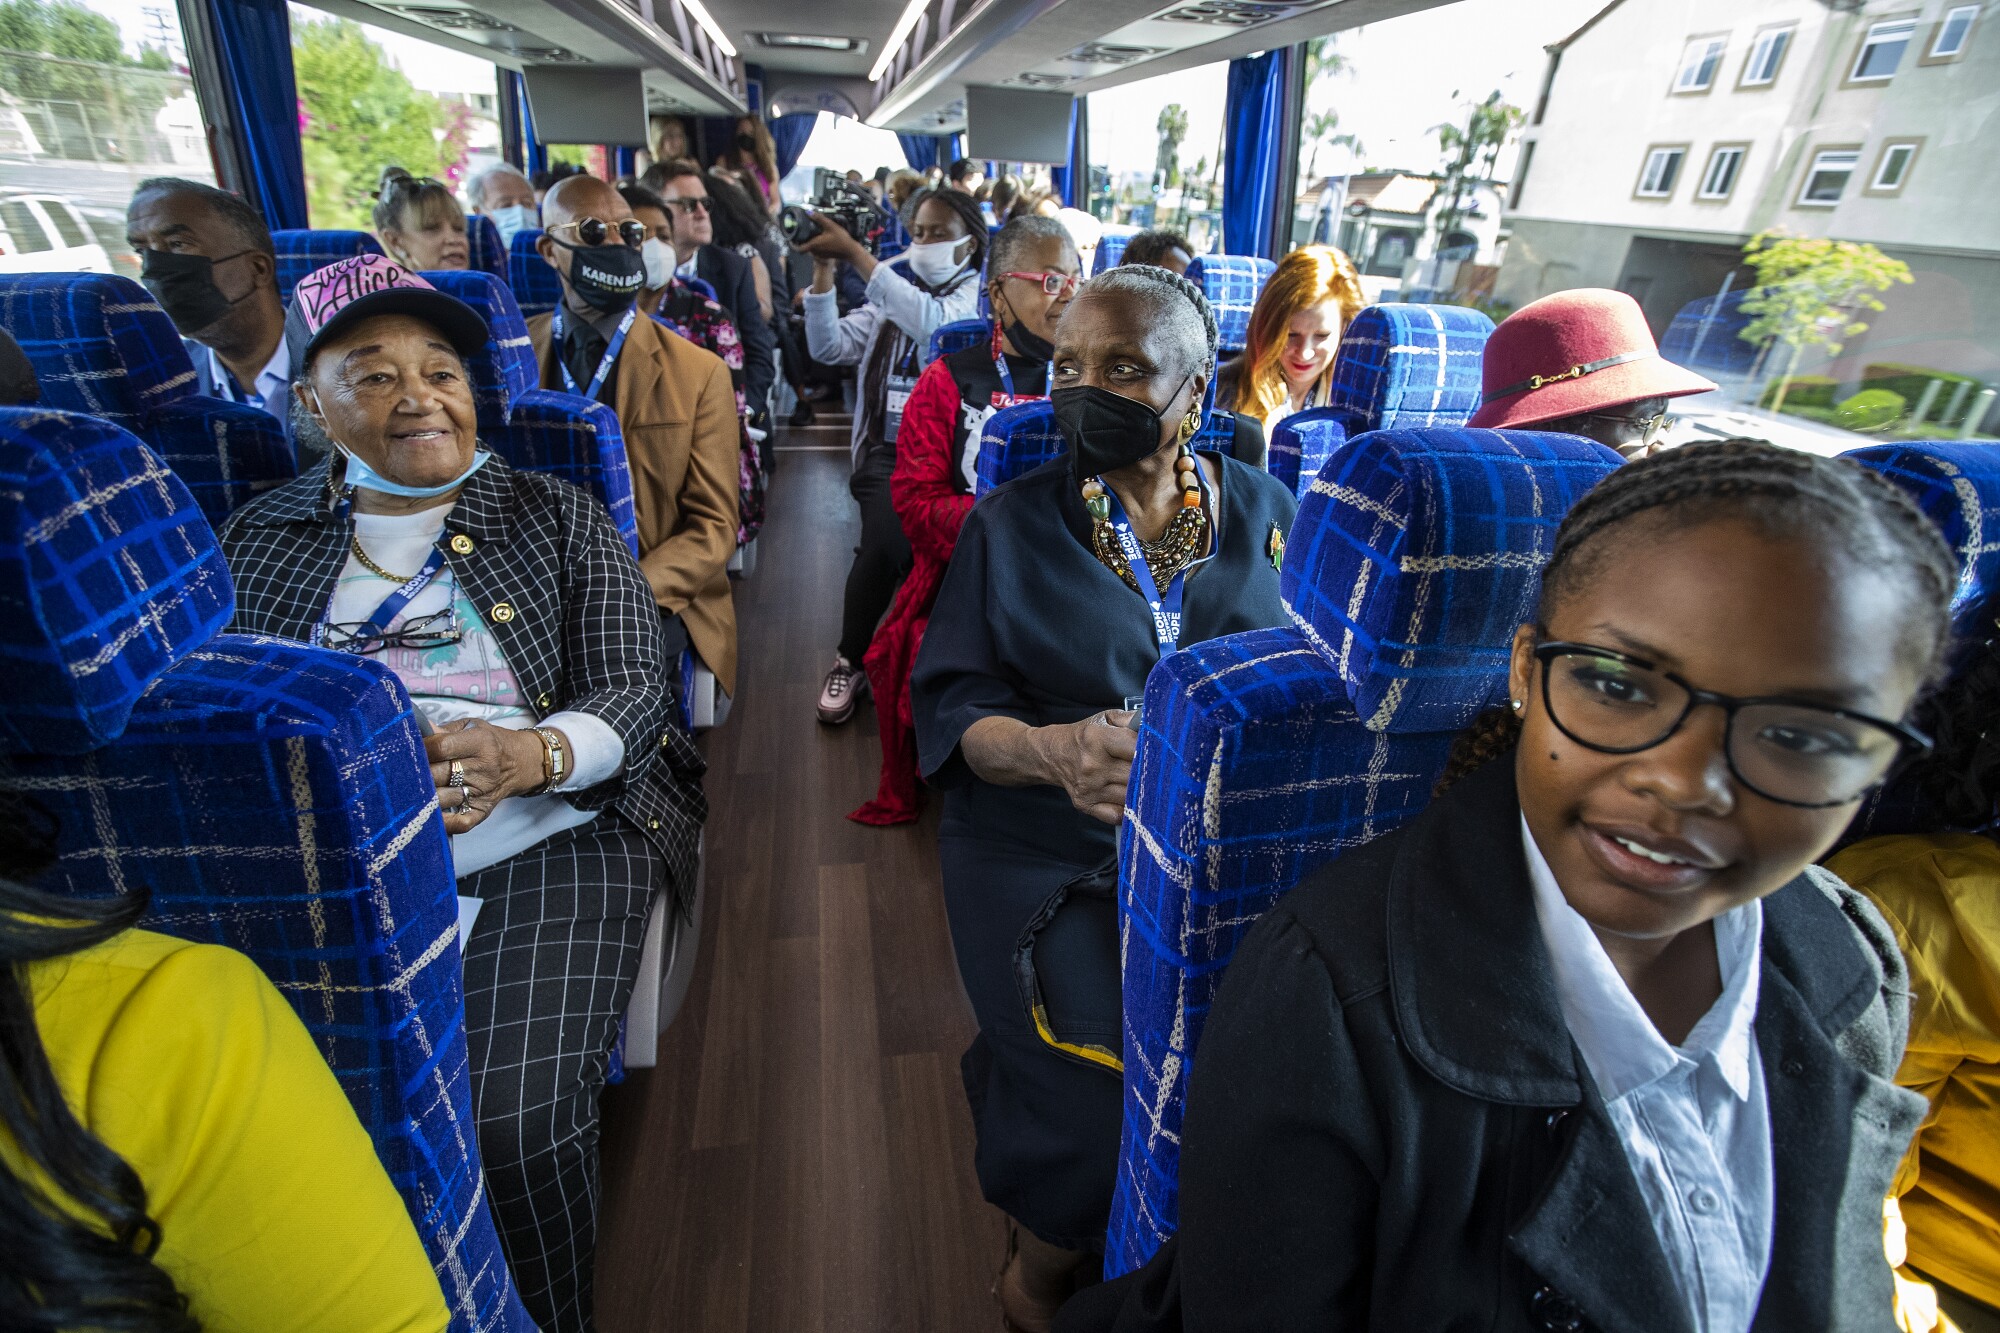 A group of people on a bus tour